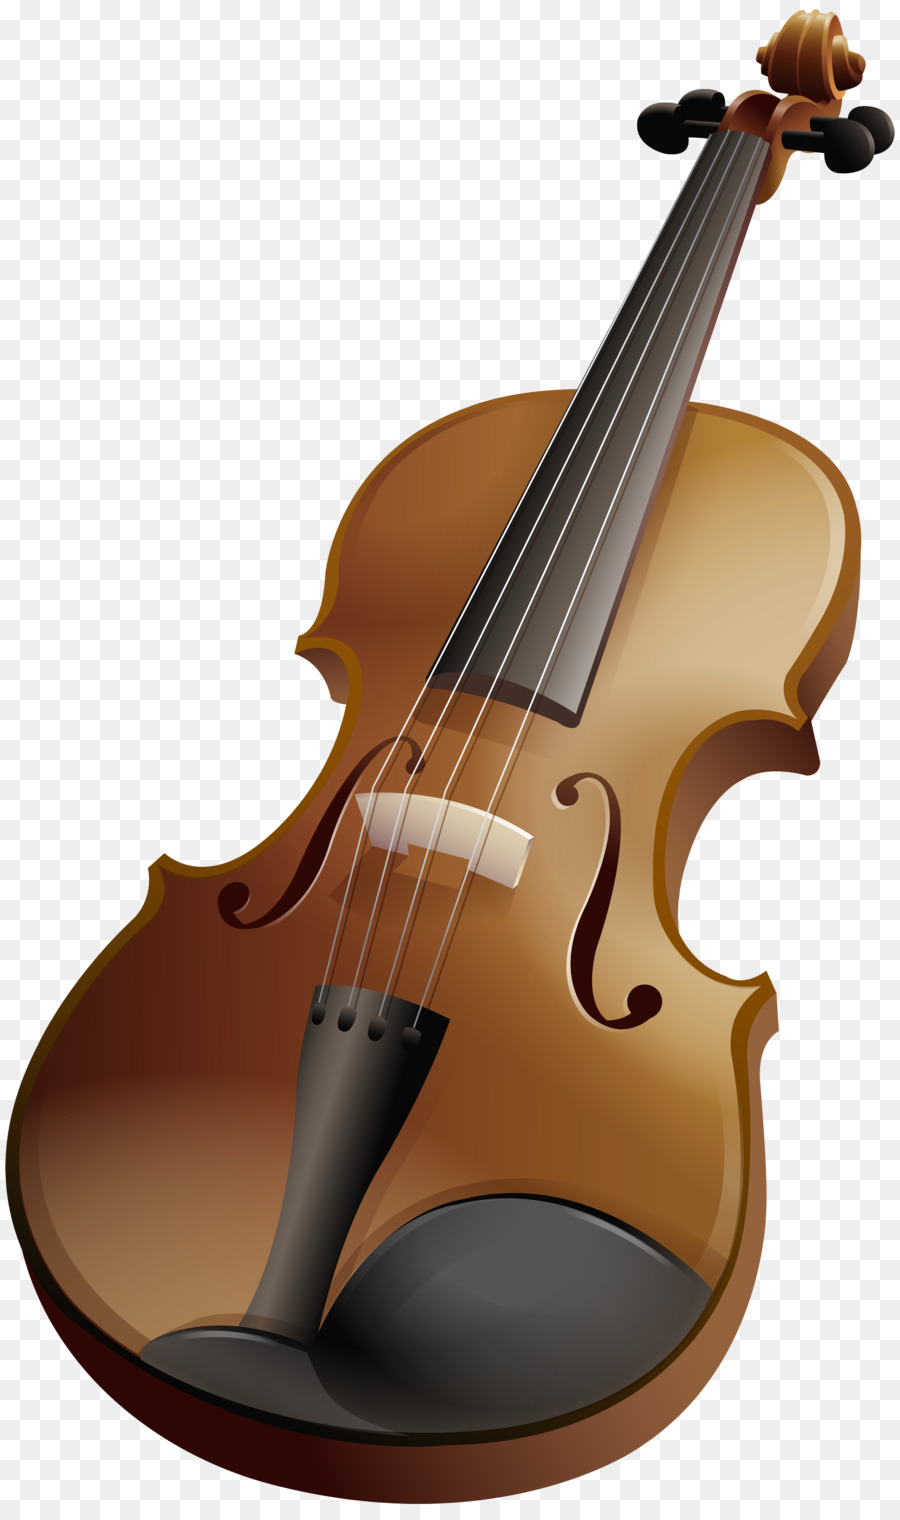 Violin family Musical Instruments Double bass Cello - violin png download - 4758*8000 - Free Transparent Violin png Download.